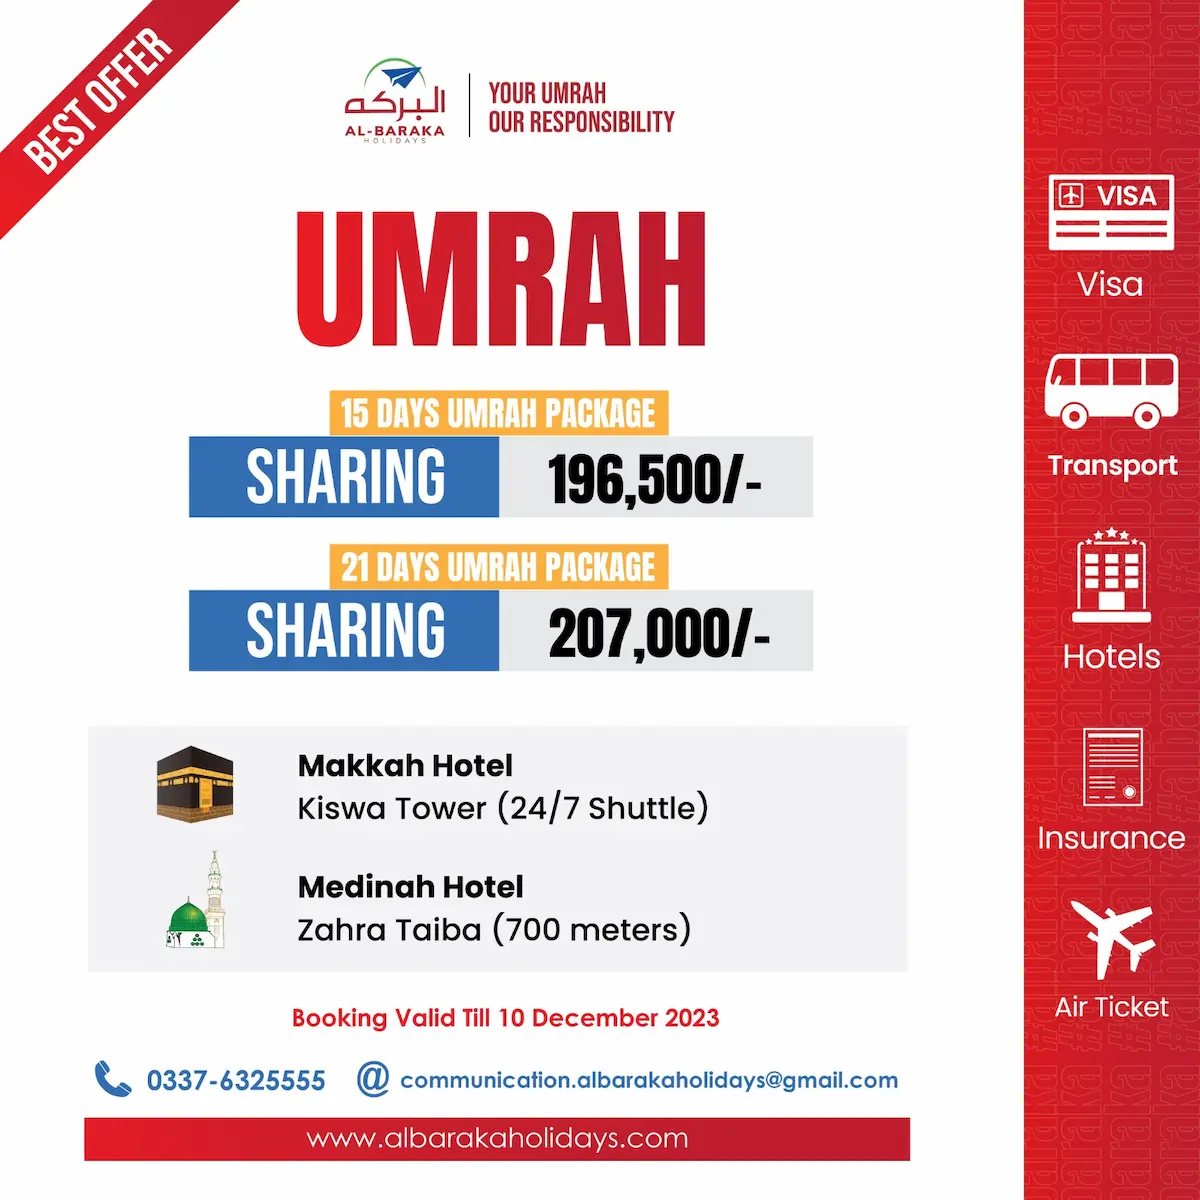 15 days umrah packages from Pakistan